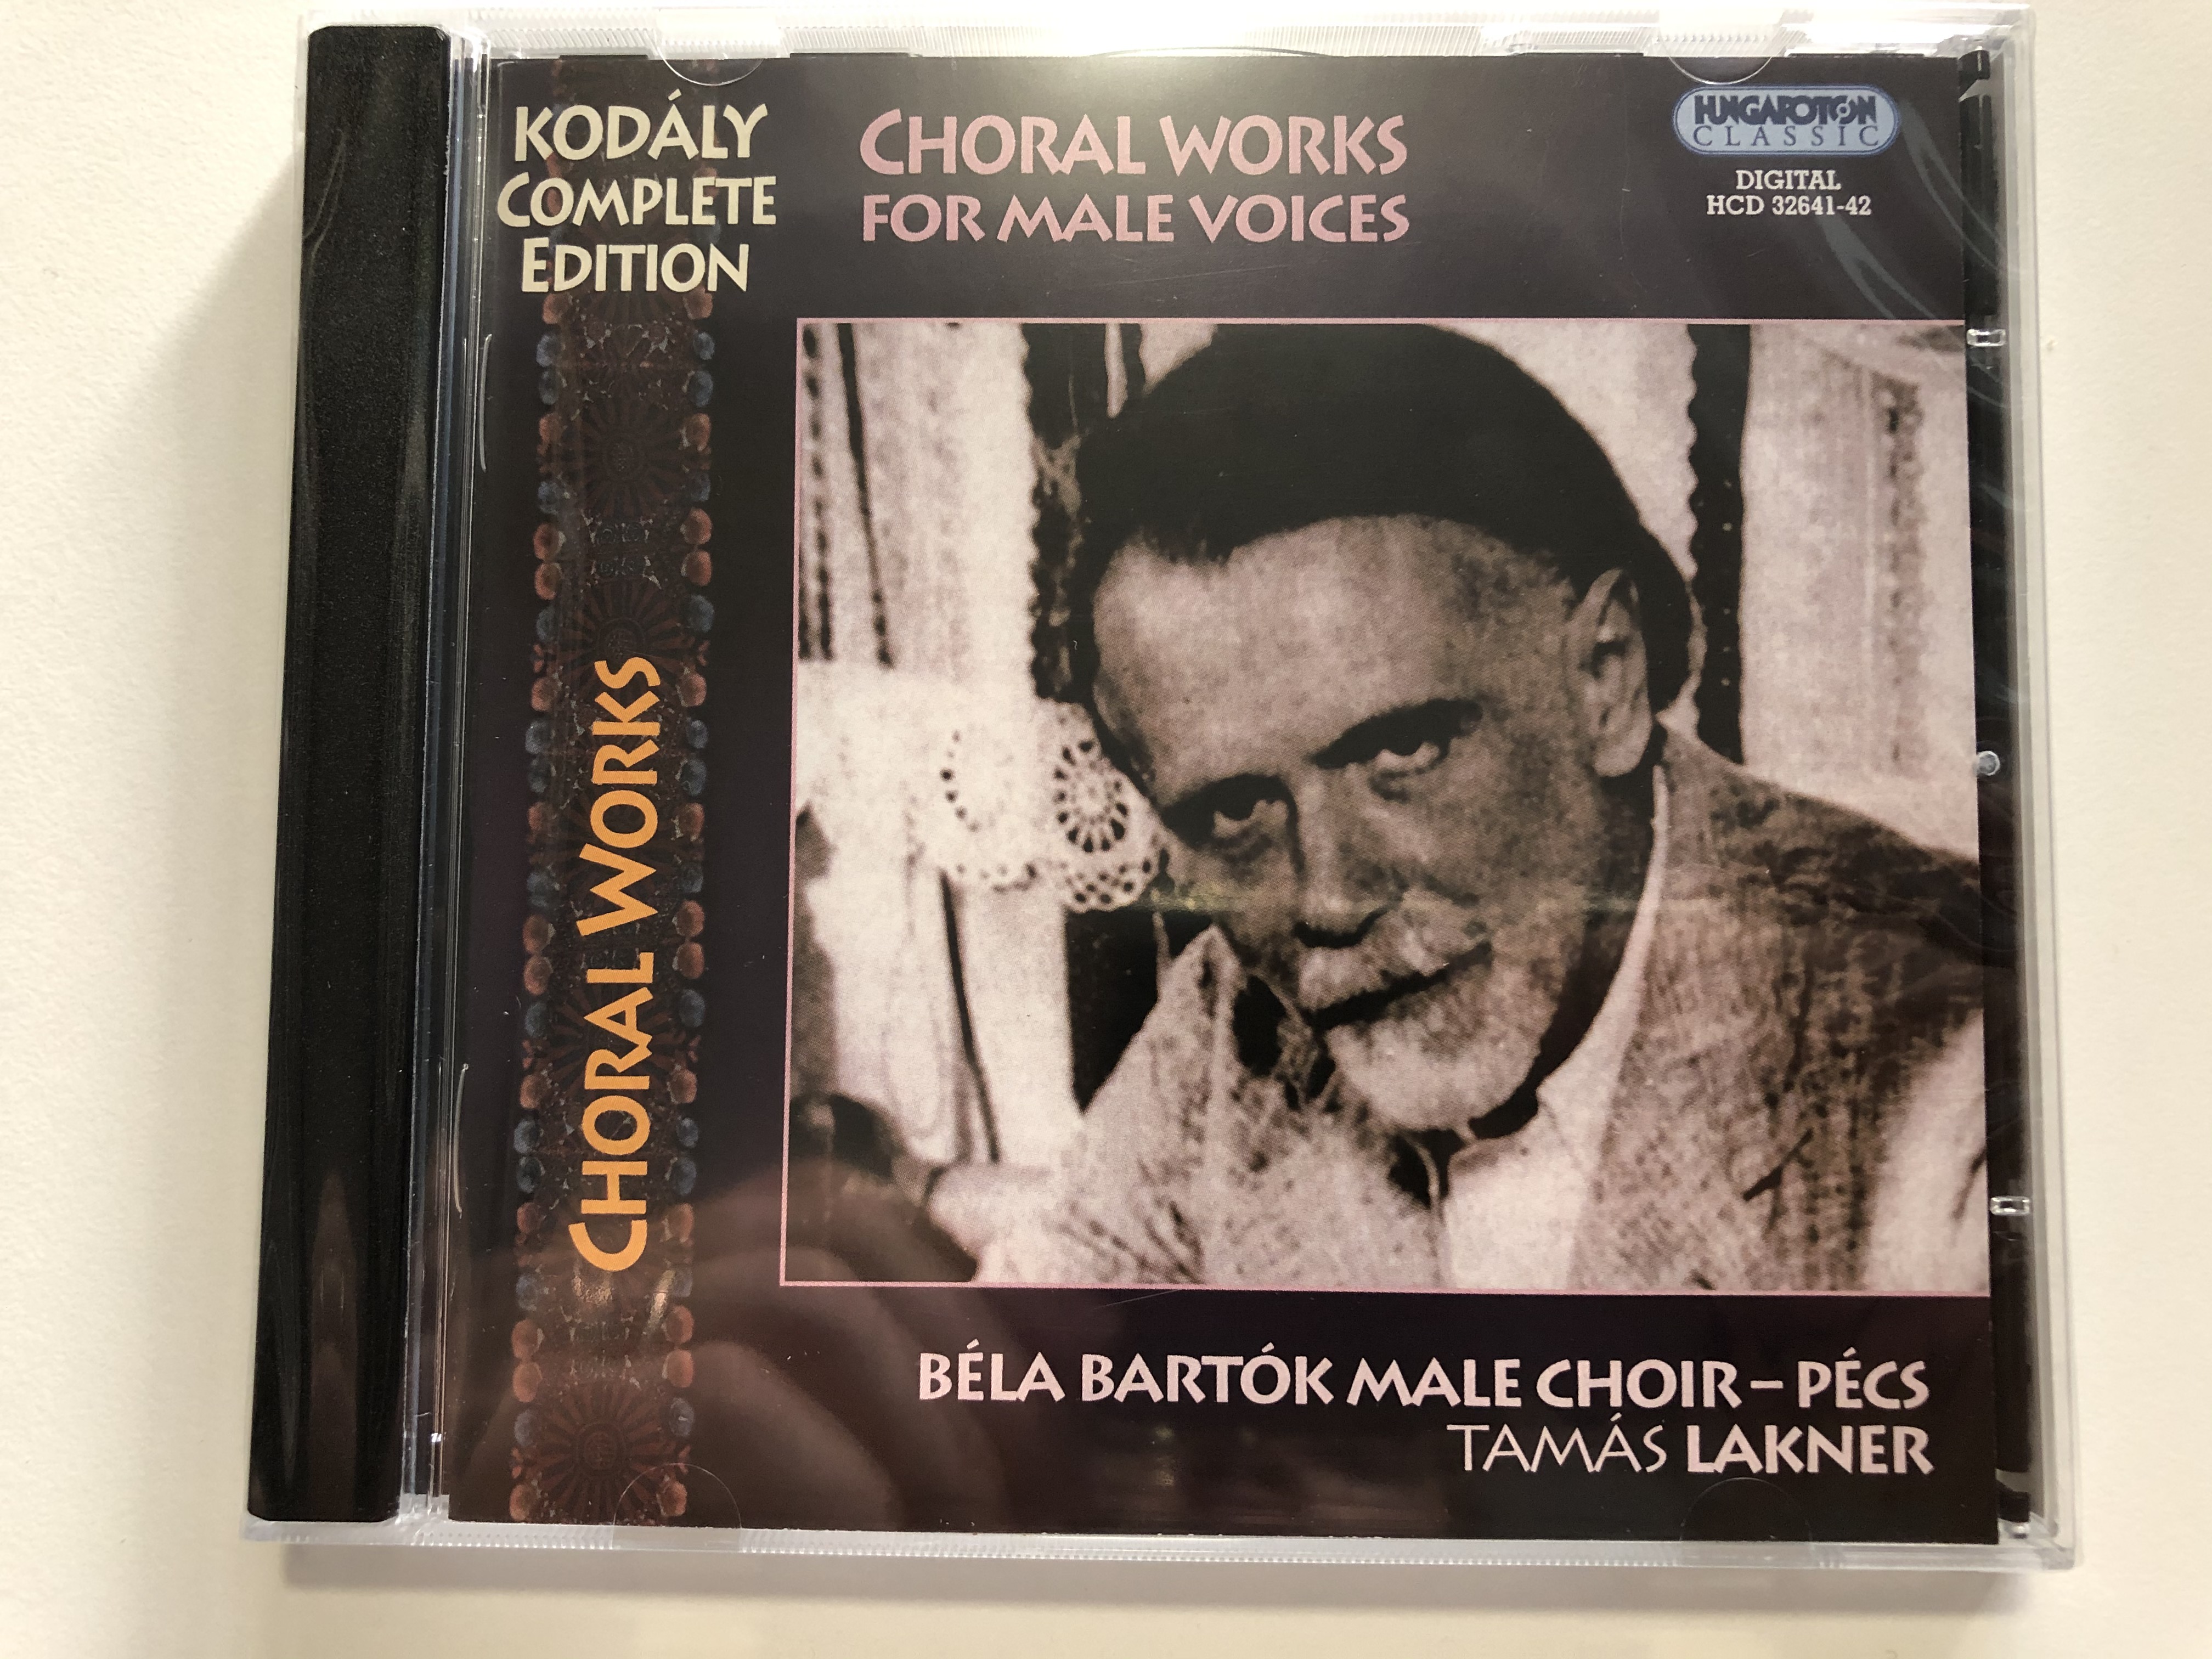 choral-works-for-male-voices-kodaly-complete-edition-bela-bartok-male-choir-pecs-tamas-lakner-hungaroton-classic-2x-audio-cd-2010-stereo-hcd-32641-42-1-.jpg